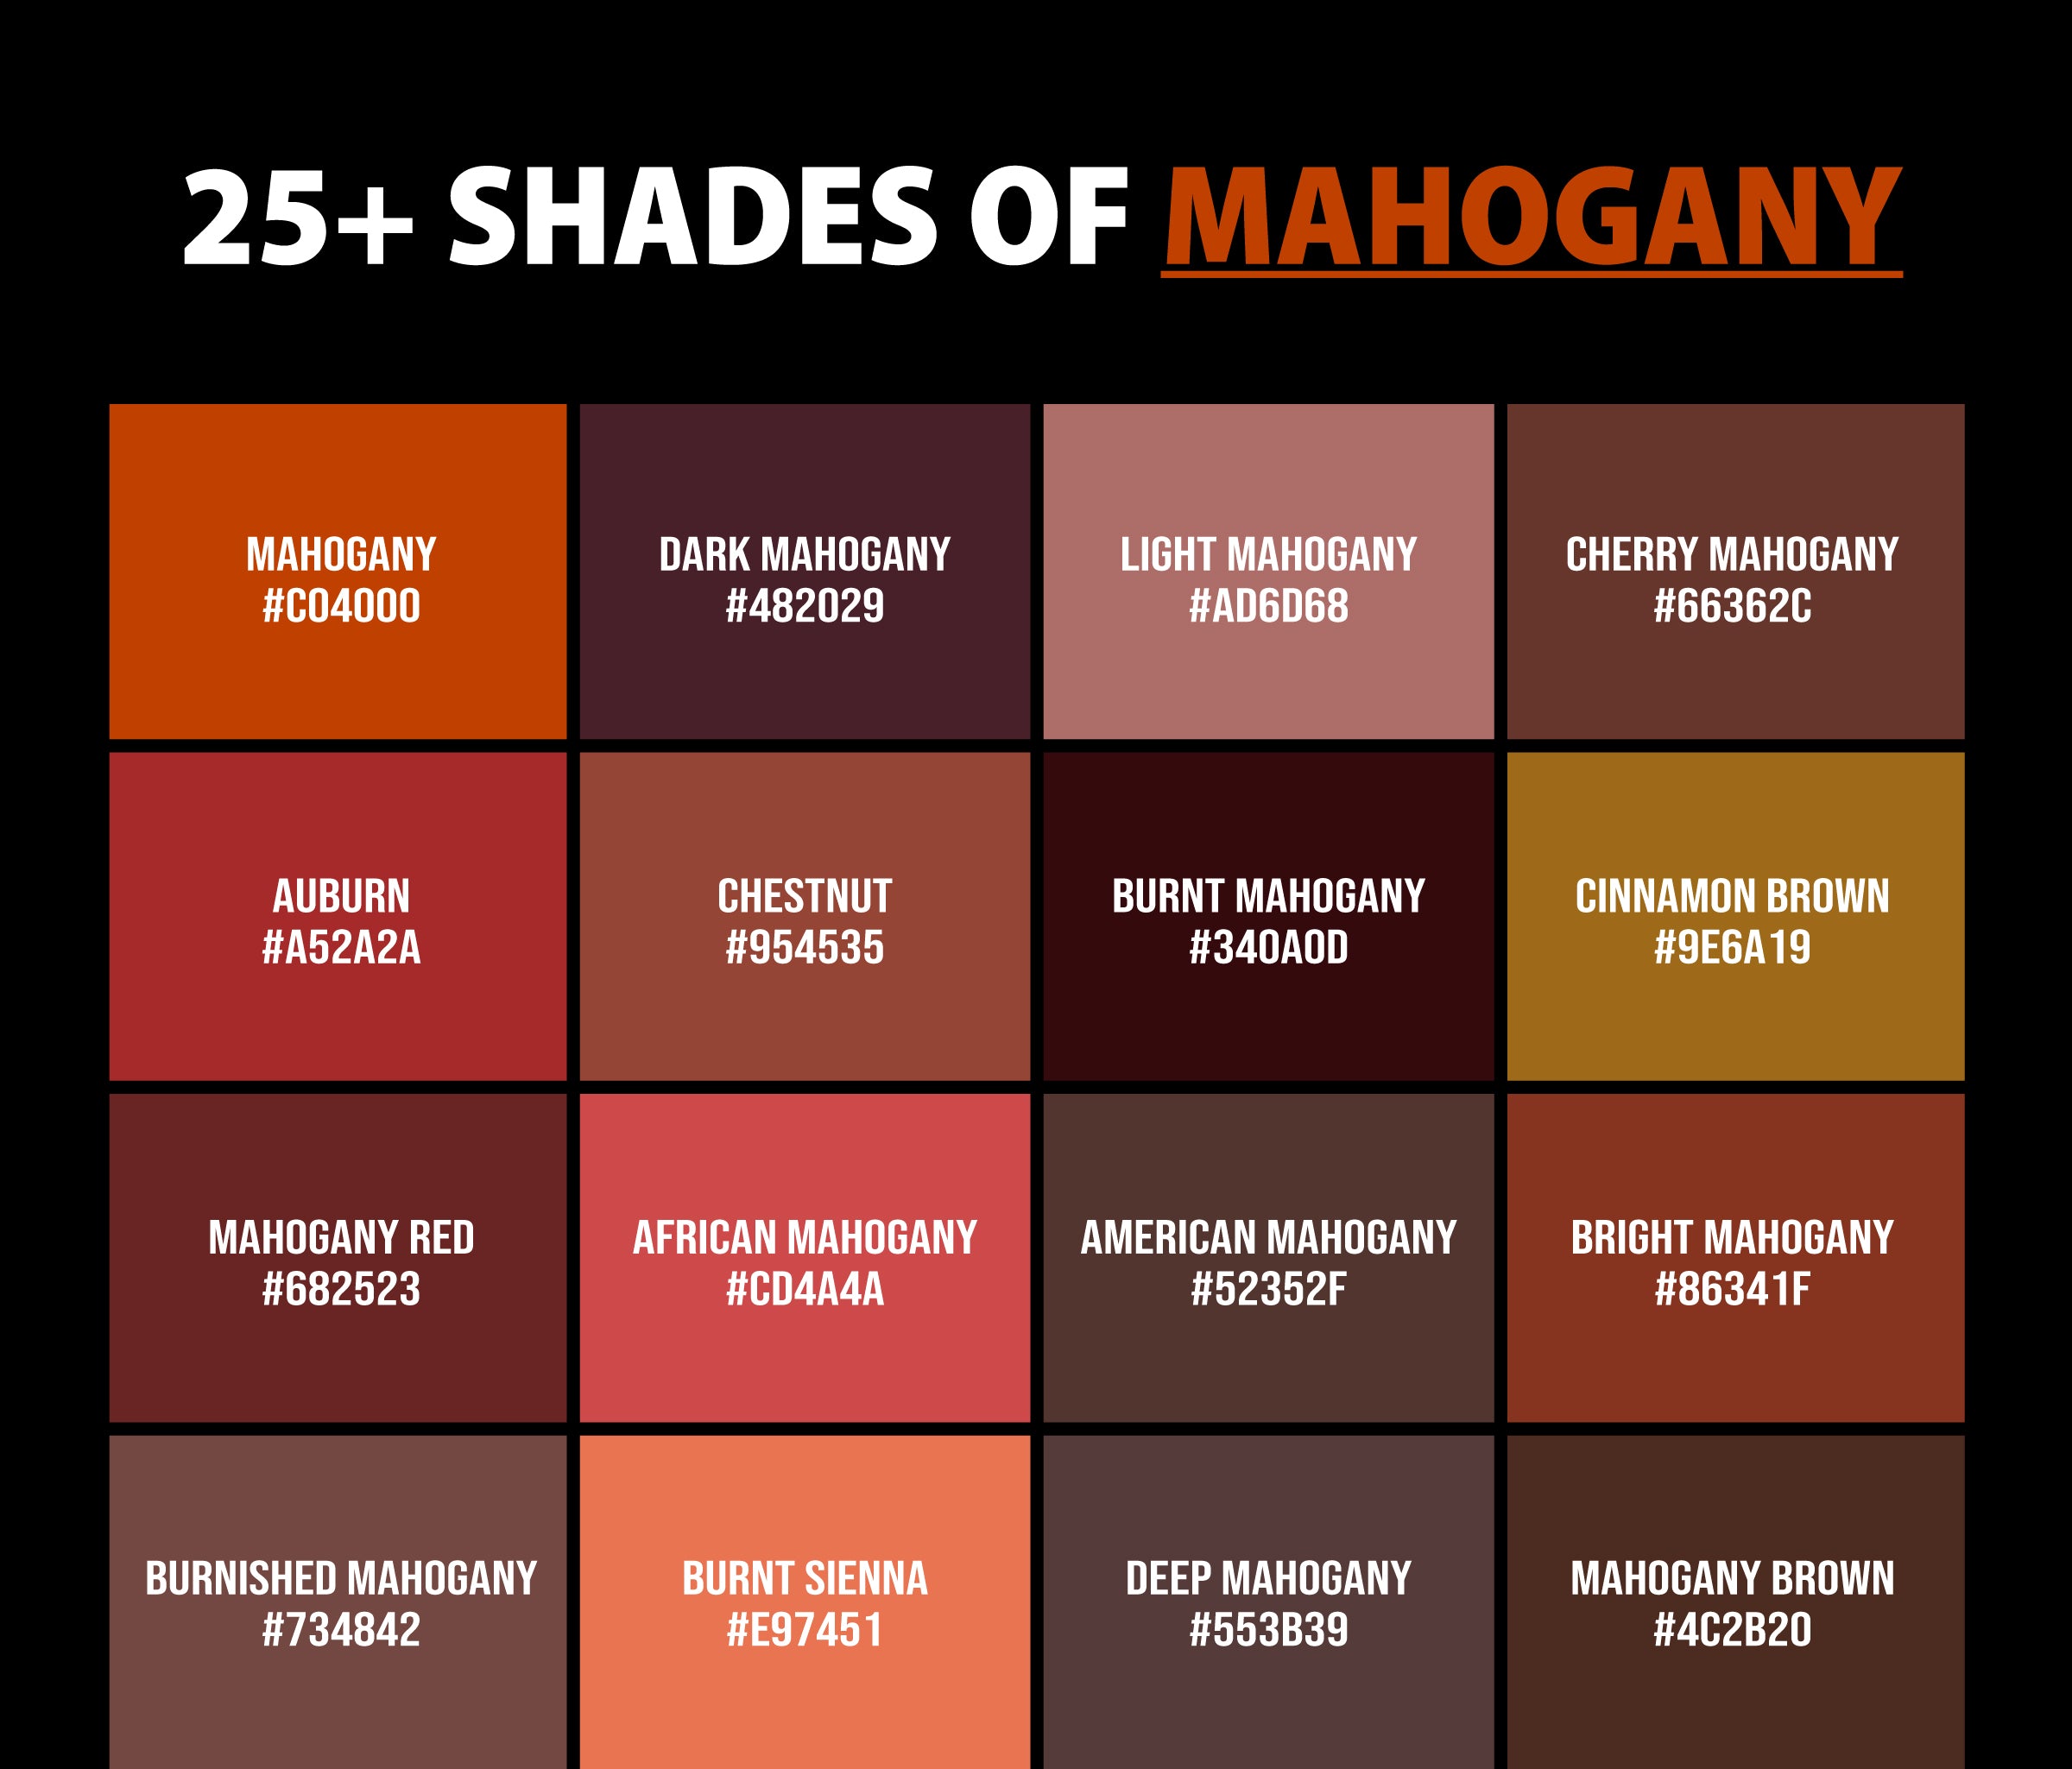 Shades Of Red Chart